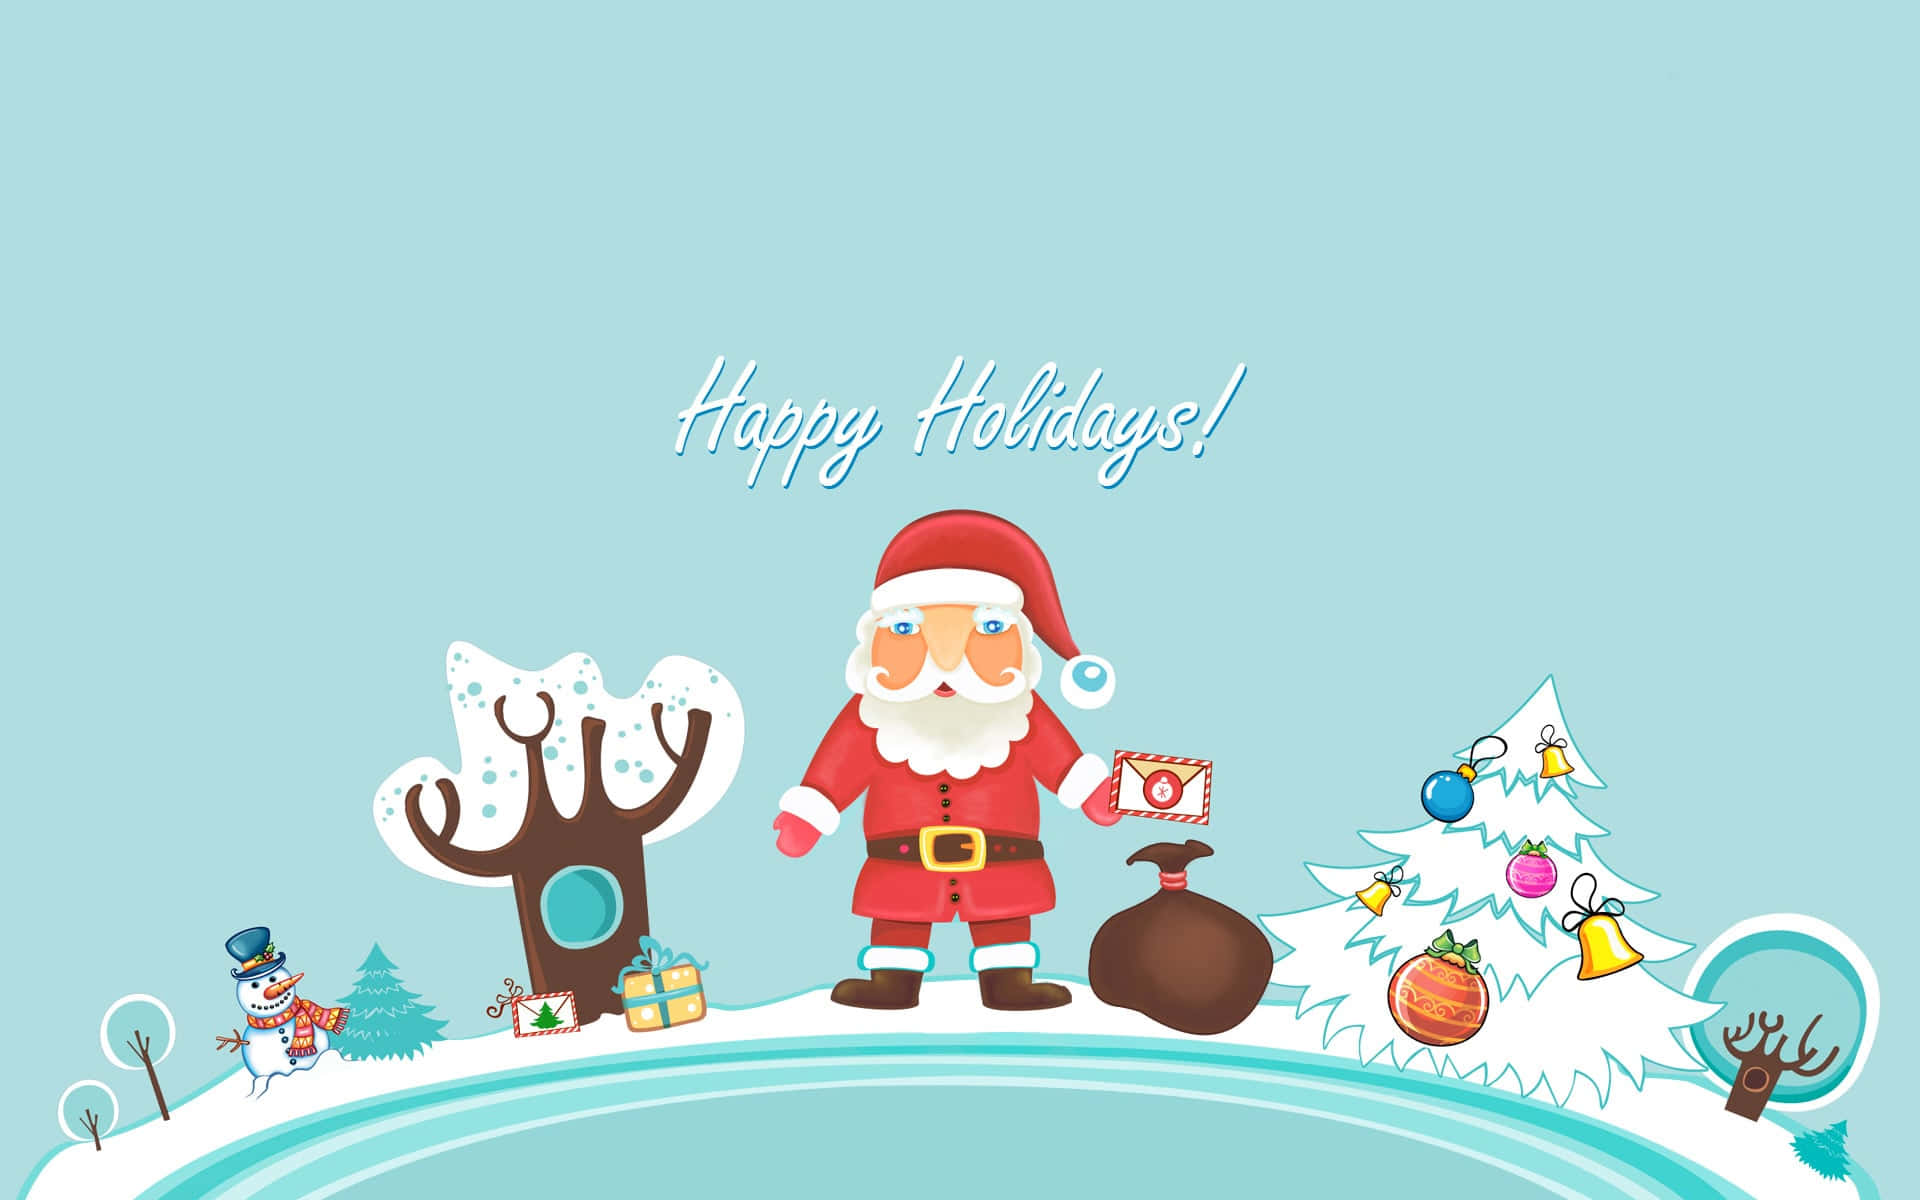 Santa Claus With A Snow Globe And Gifts Wallpaper